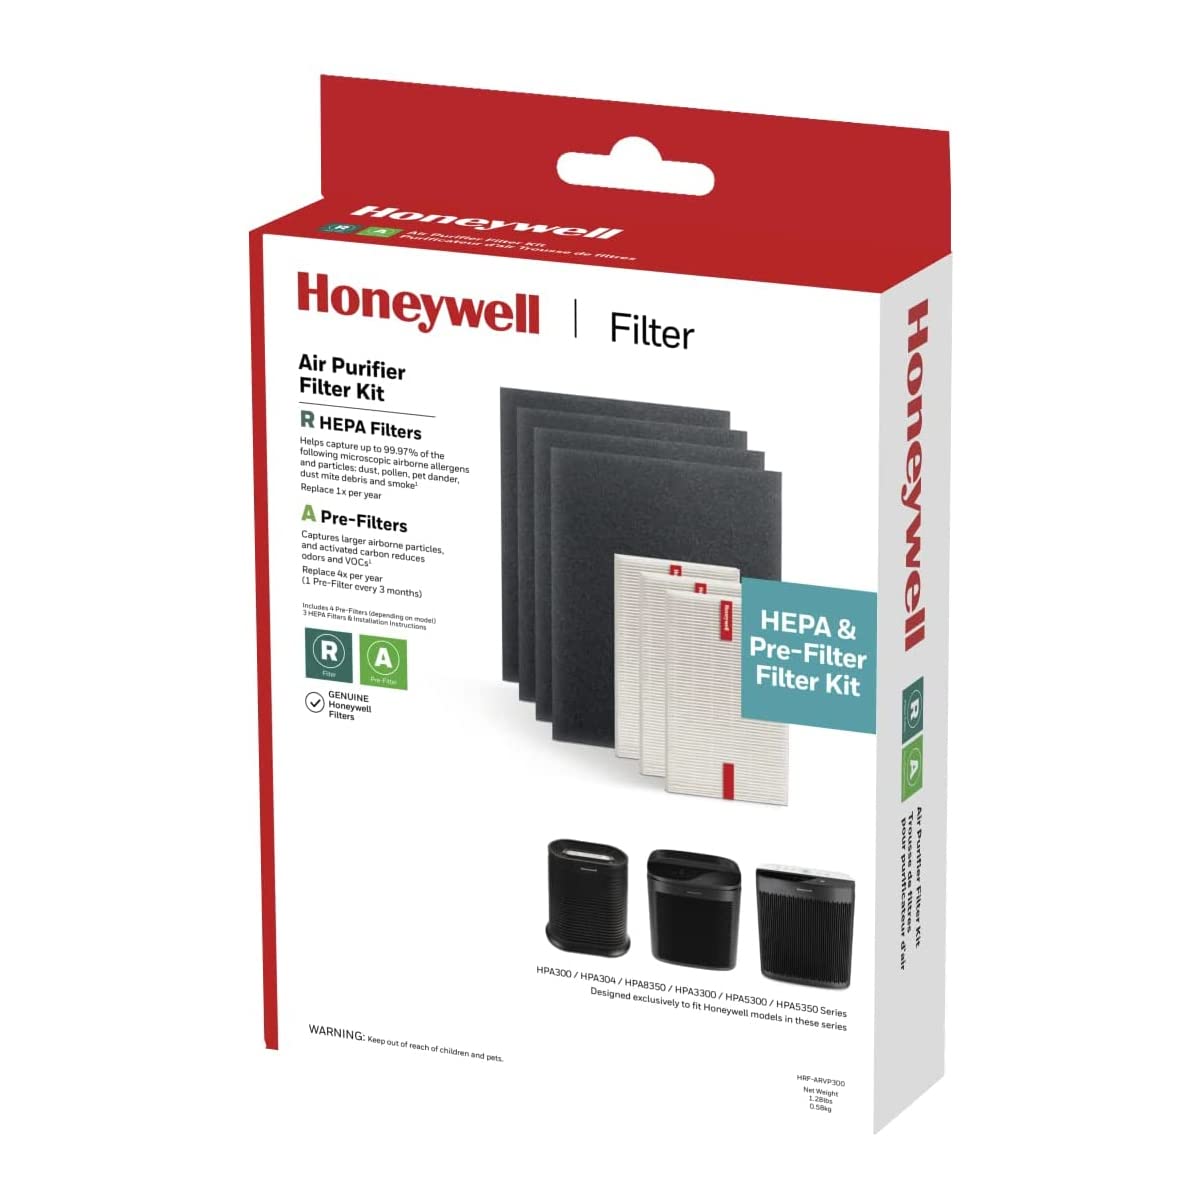 Honeywell HEPA Air Purifier Filter Kit – Includes 3 HEPA R Replacement Filters and 4 A Carbon Pre-Cut Pre-Filters – Airborne Allergen Air Filter Targets Wildfire/Smoke, Pollen, Pet Dander, and Dust